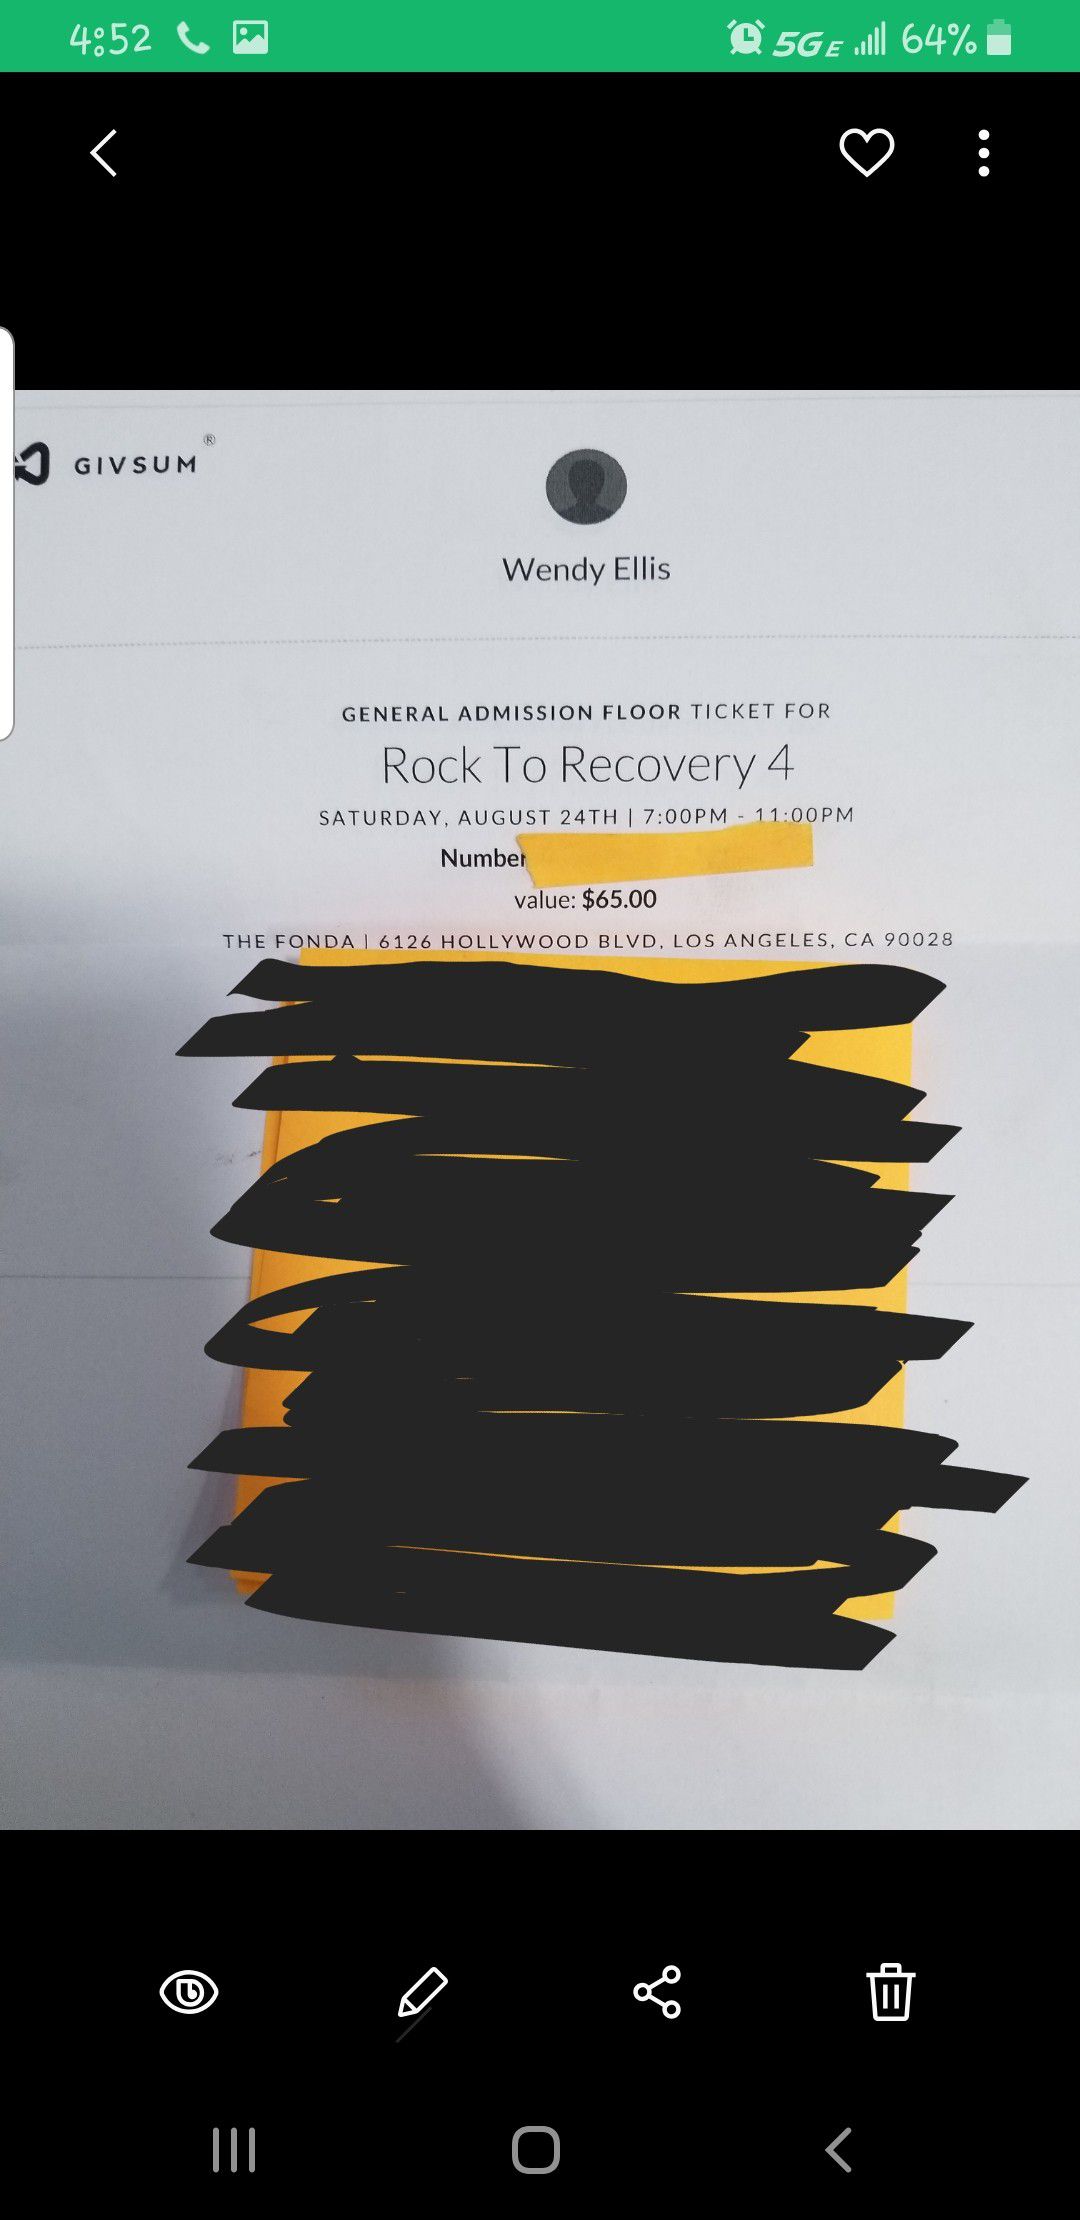 Rock to recovery tickets